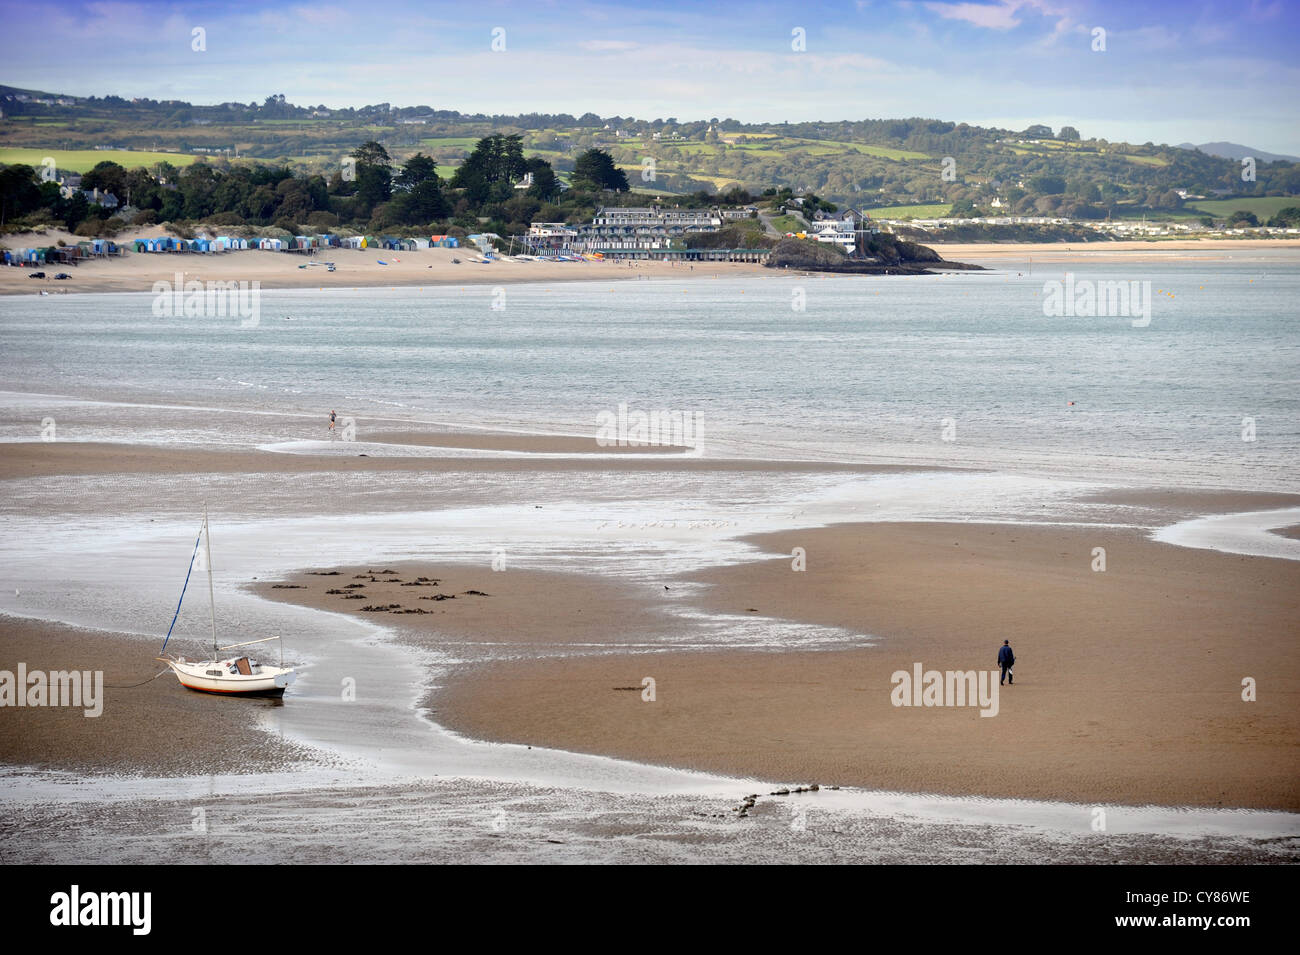 A fisherman carrying a spade to dig for lugworms crosses the sands on Borth Fawr or Main Beach at Abersoch on the Lleyn Peninsul Stock Photo